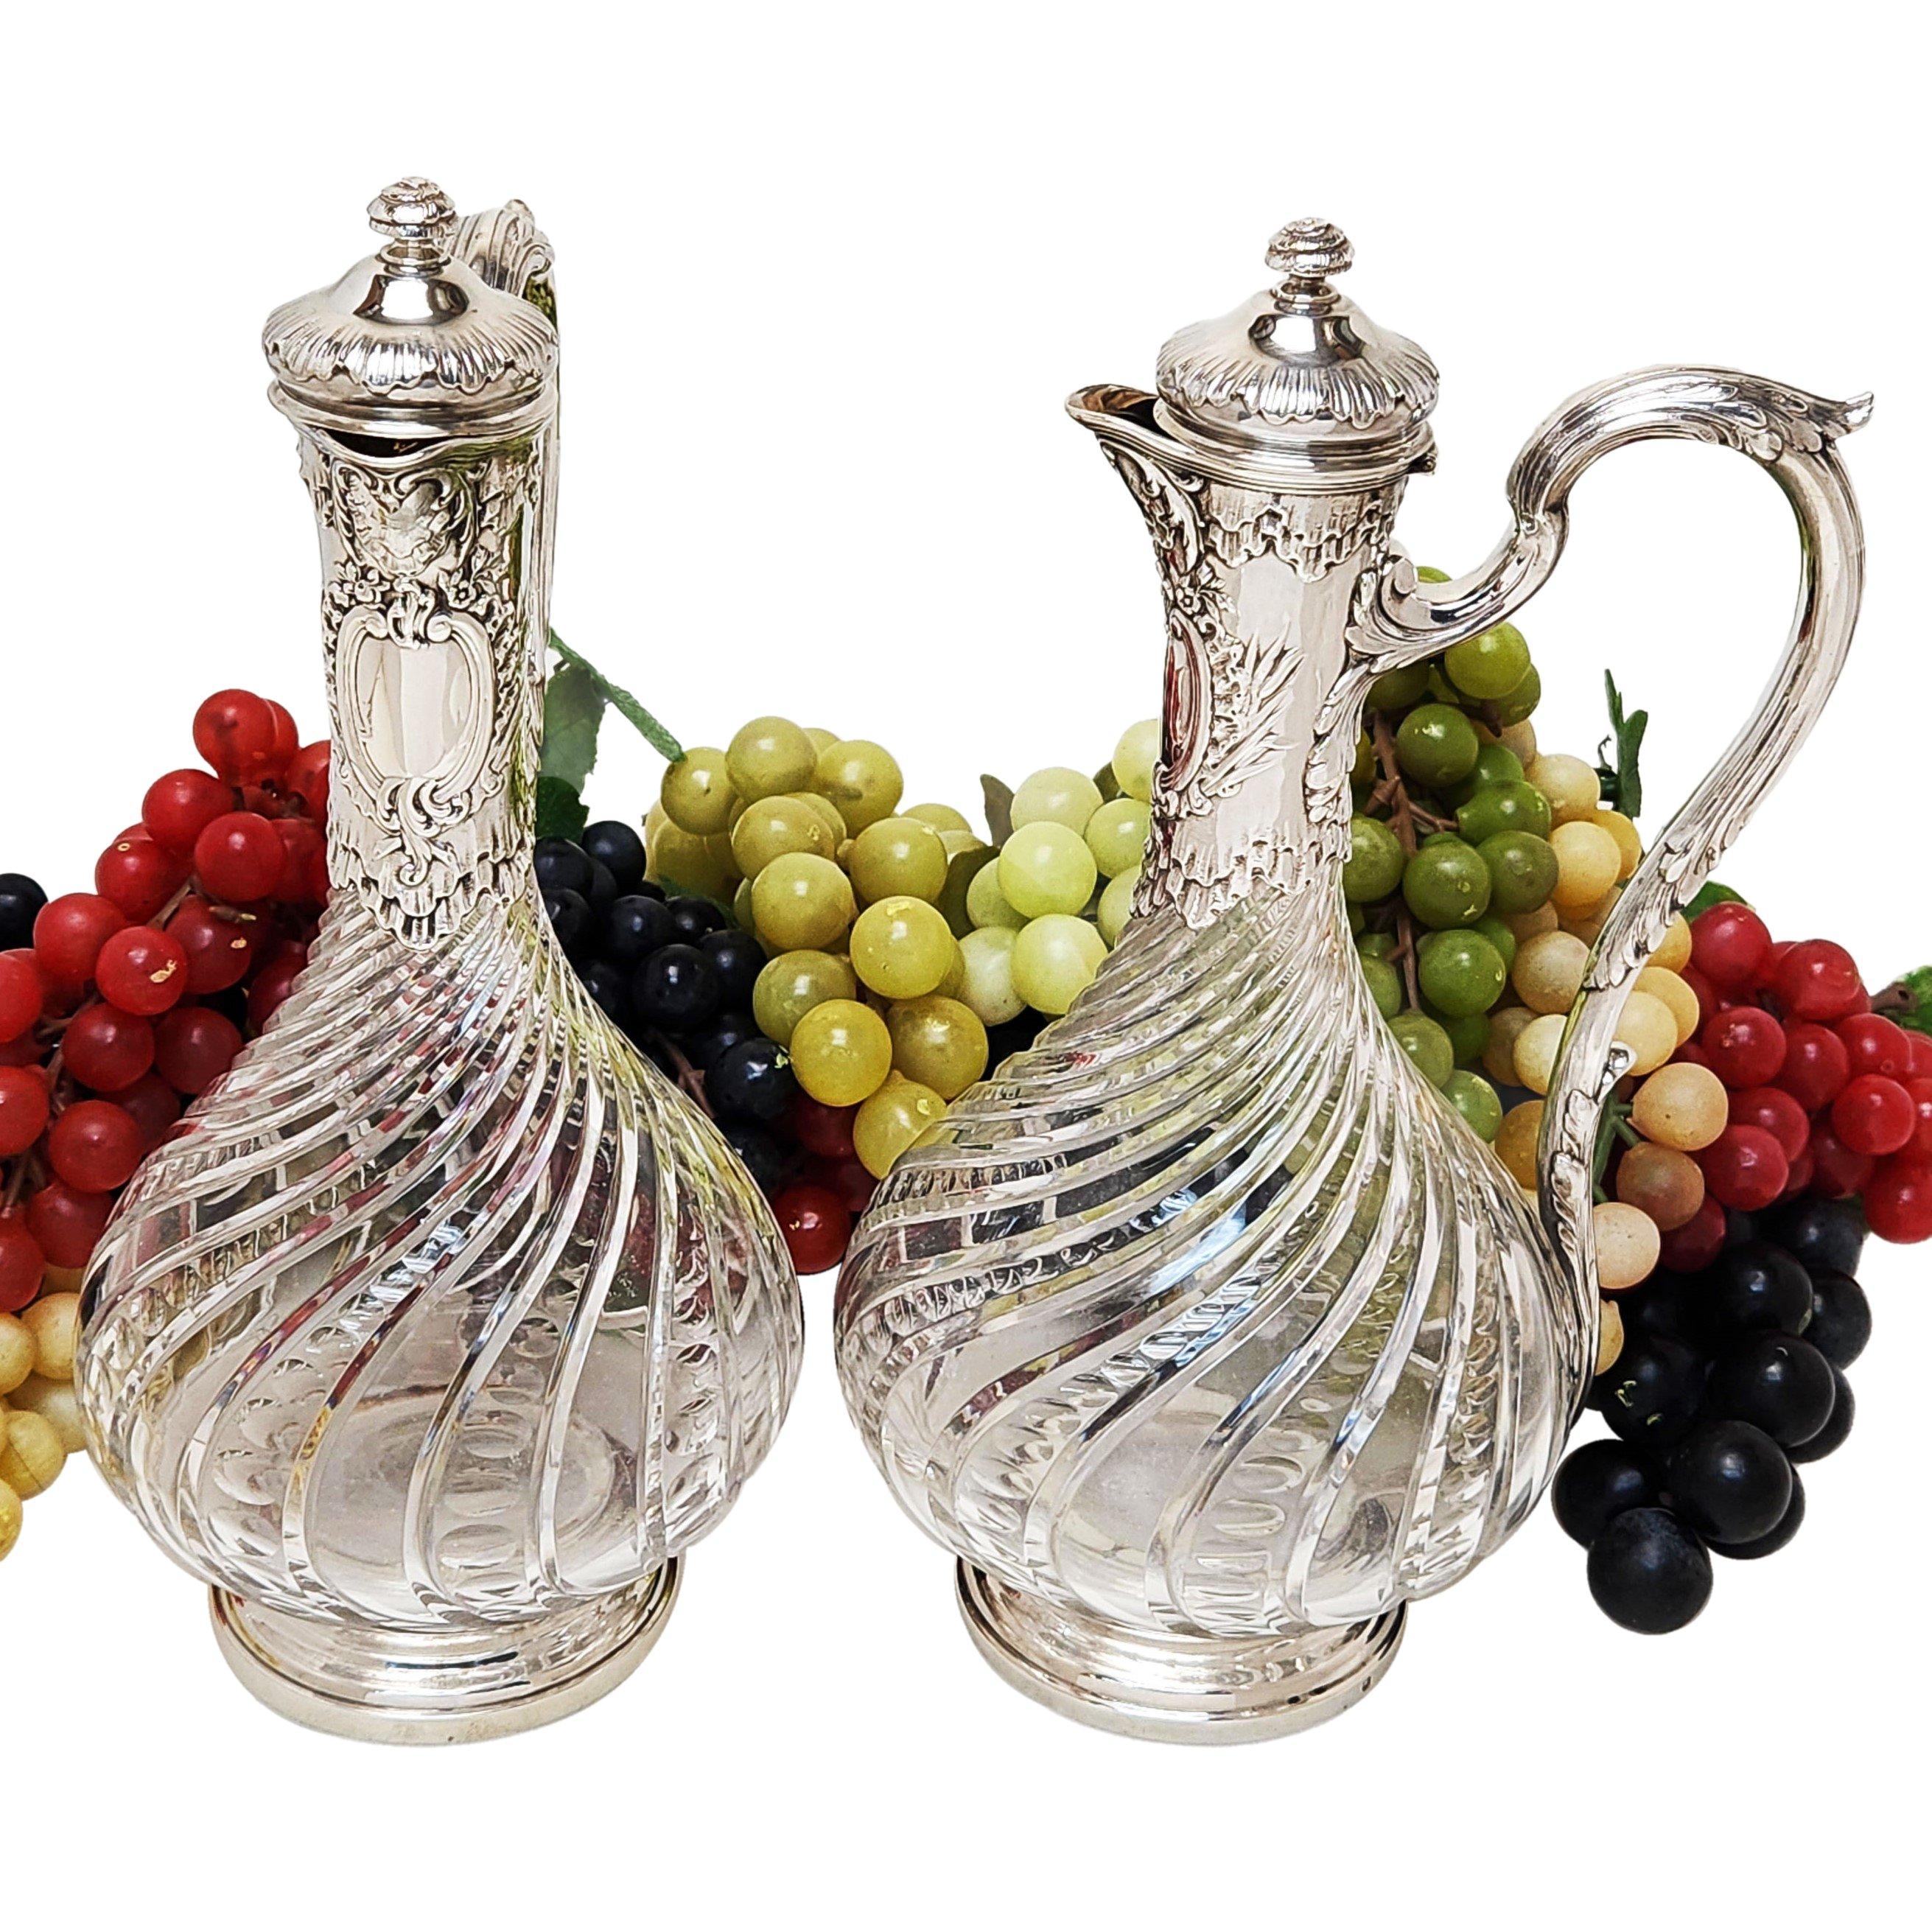 Pair Antique French Silver & Glass Claret Jugs / Wine Decanters c. 1890  In Good Condition For Sale In London, GB